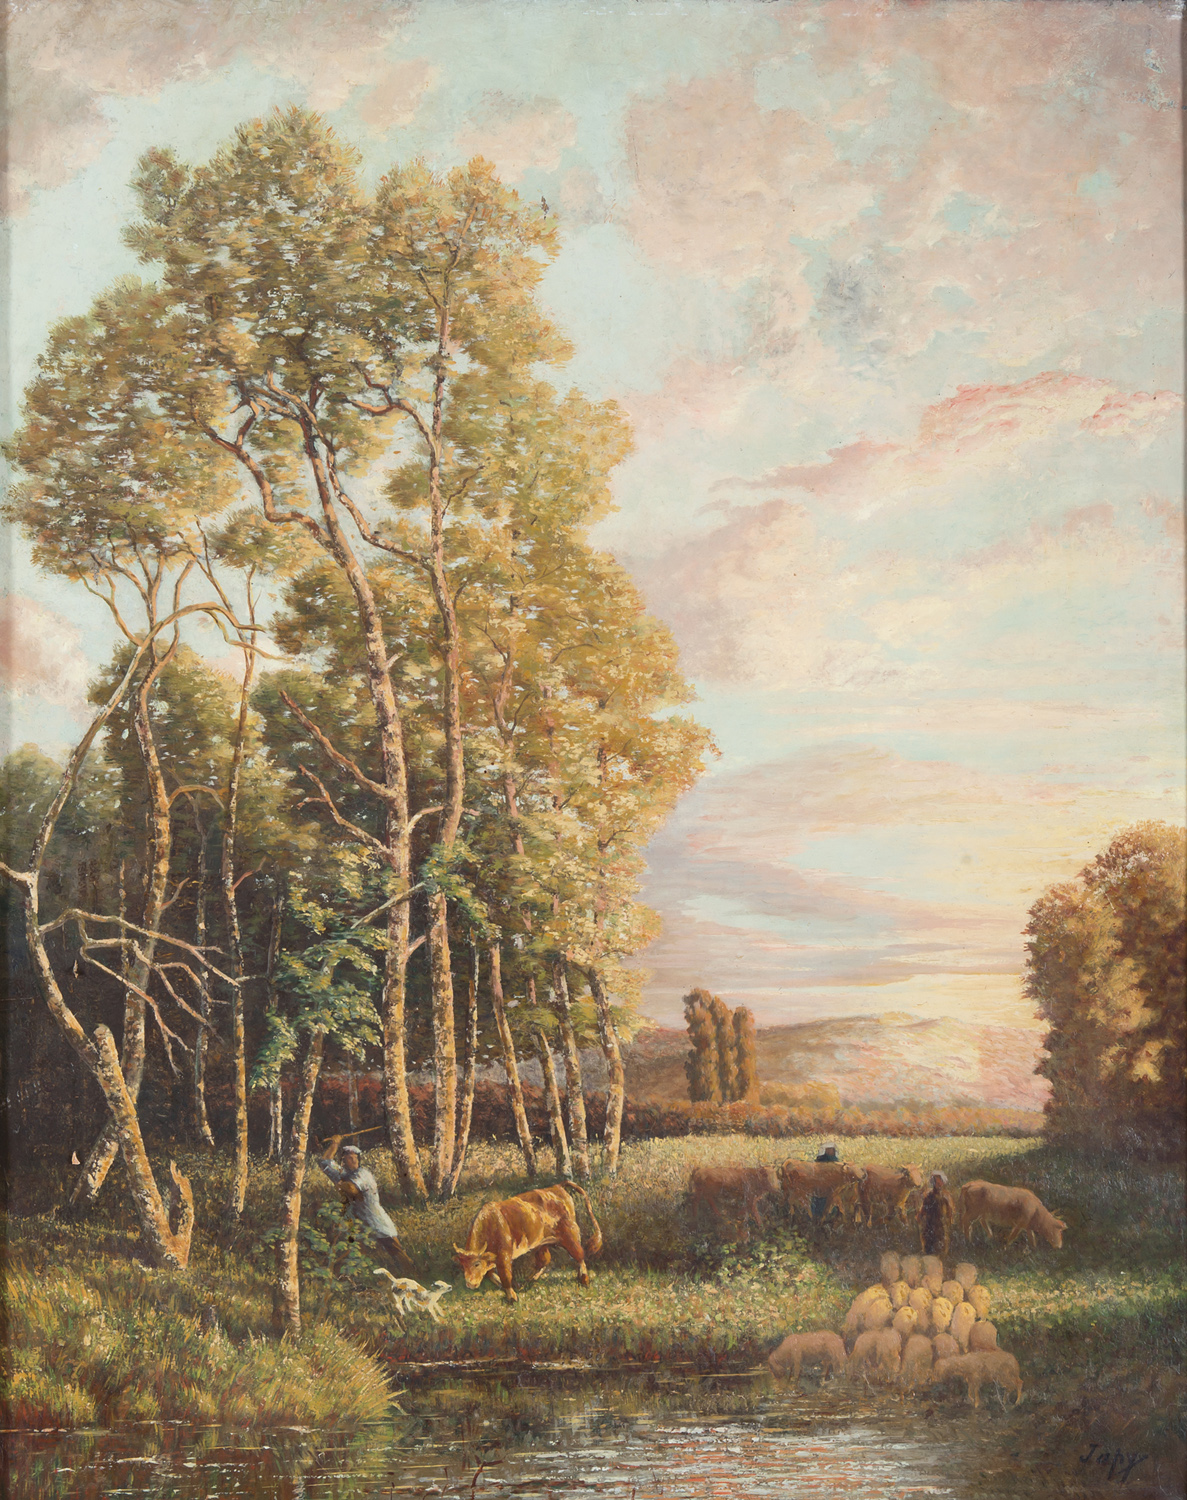 OIL PAINTING OF A LANDSCAPE BY LOUIS AIMÈ JAPY (1840-1916)